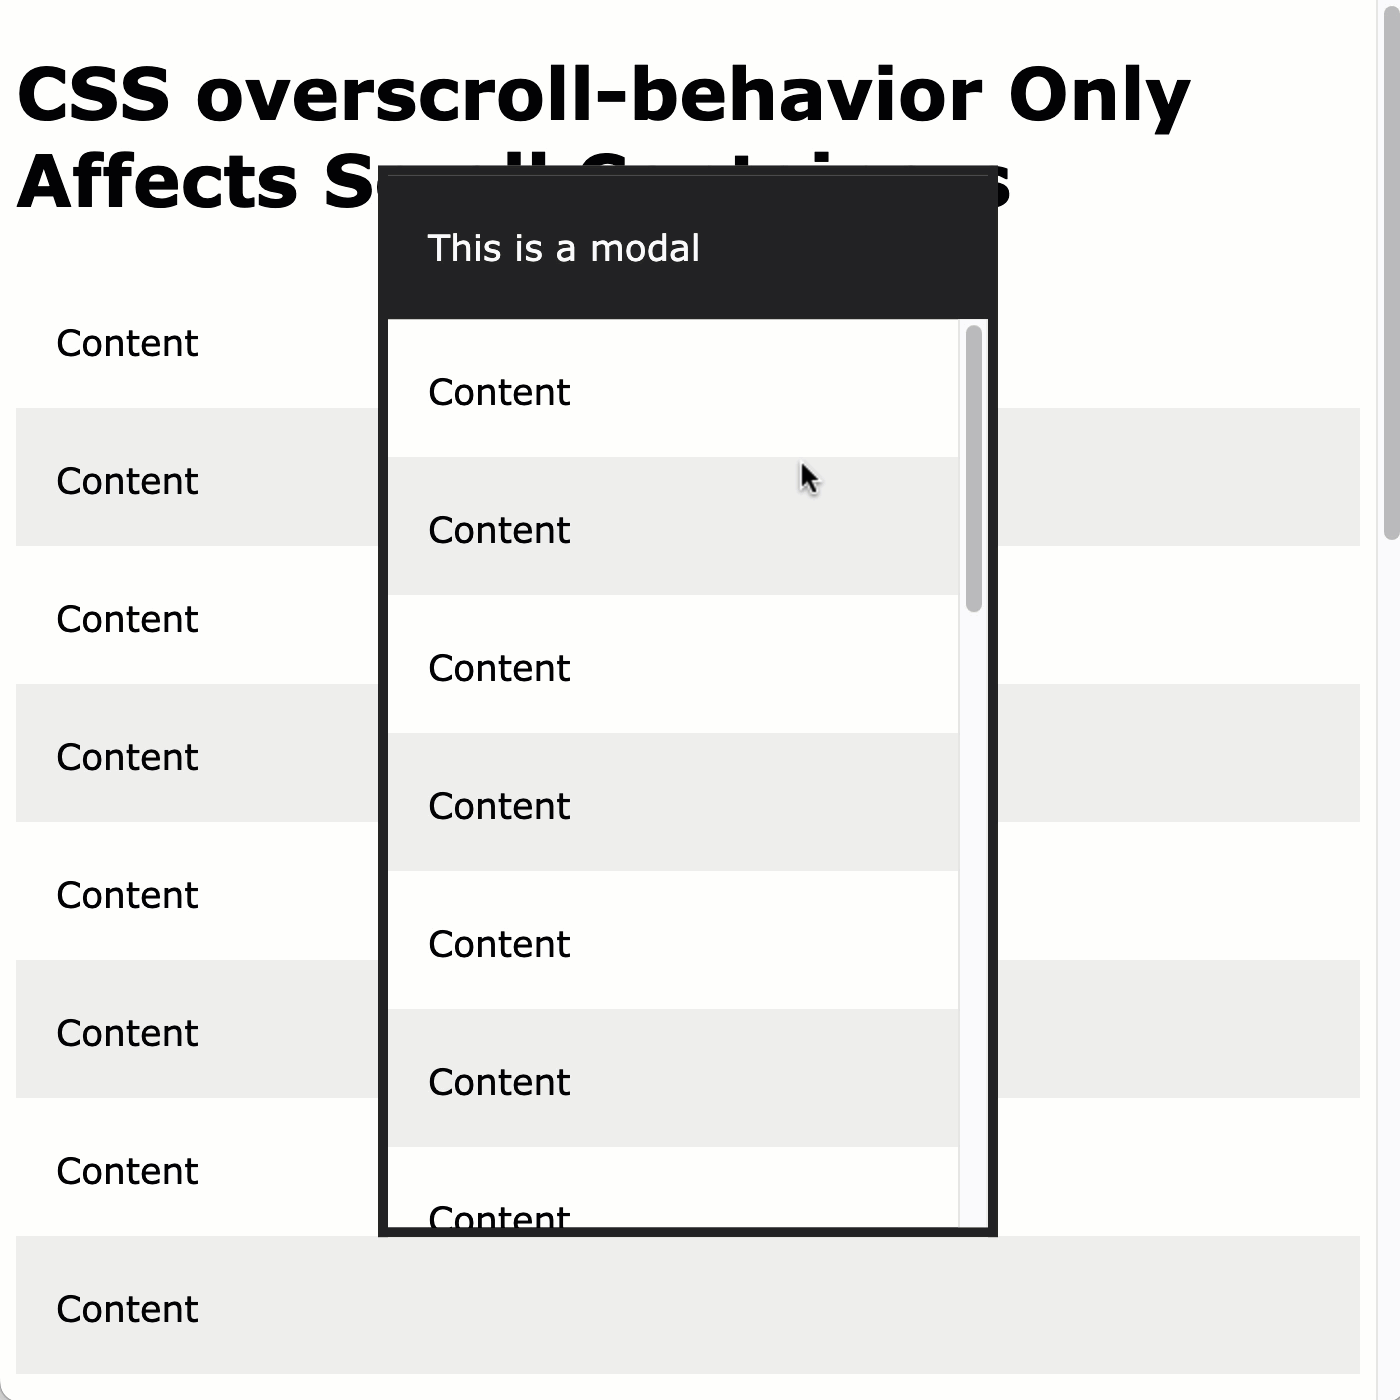 Body scrolling is only prevented when overscroll-behavior is used on a scrolling element.